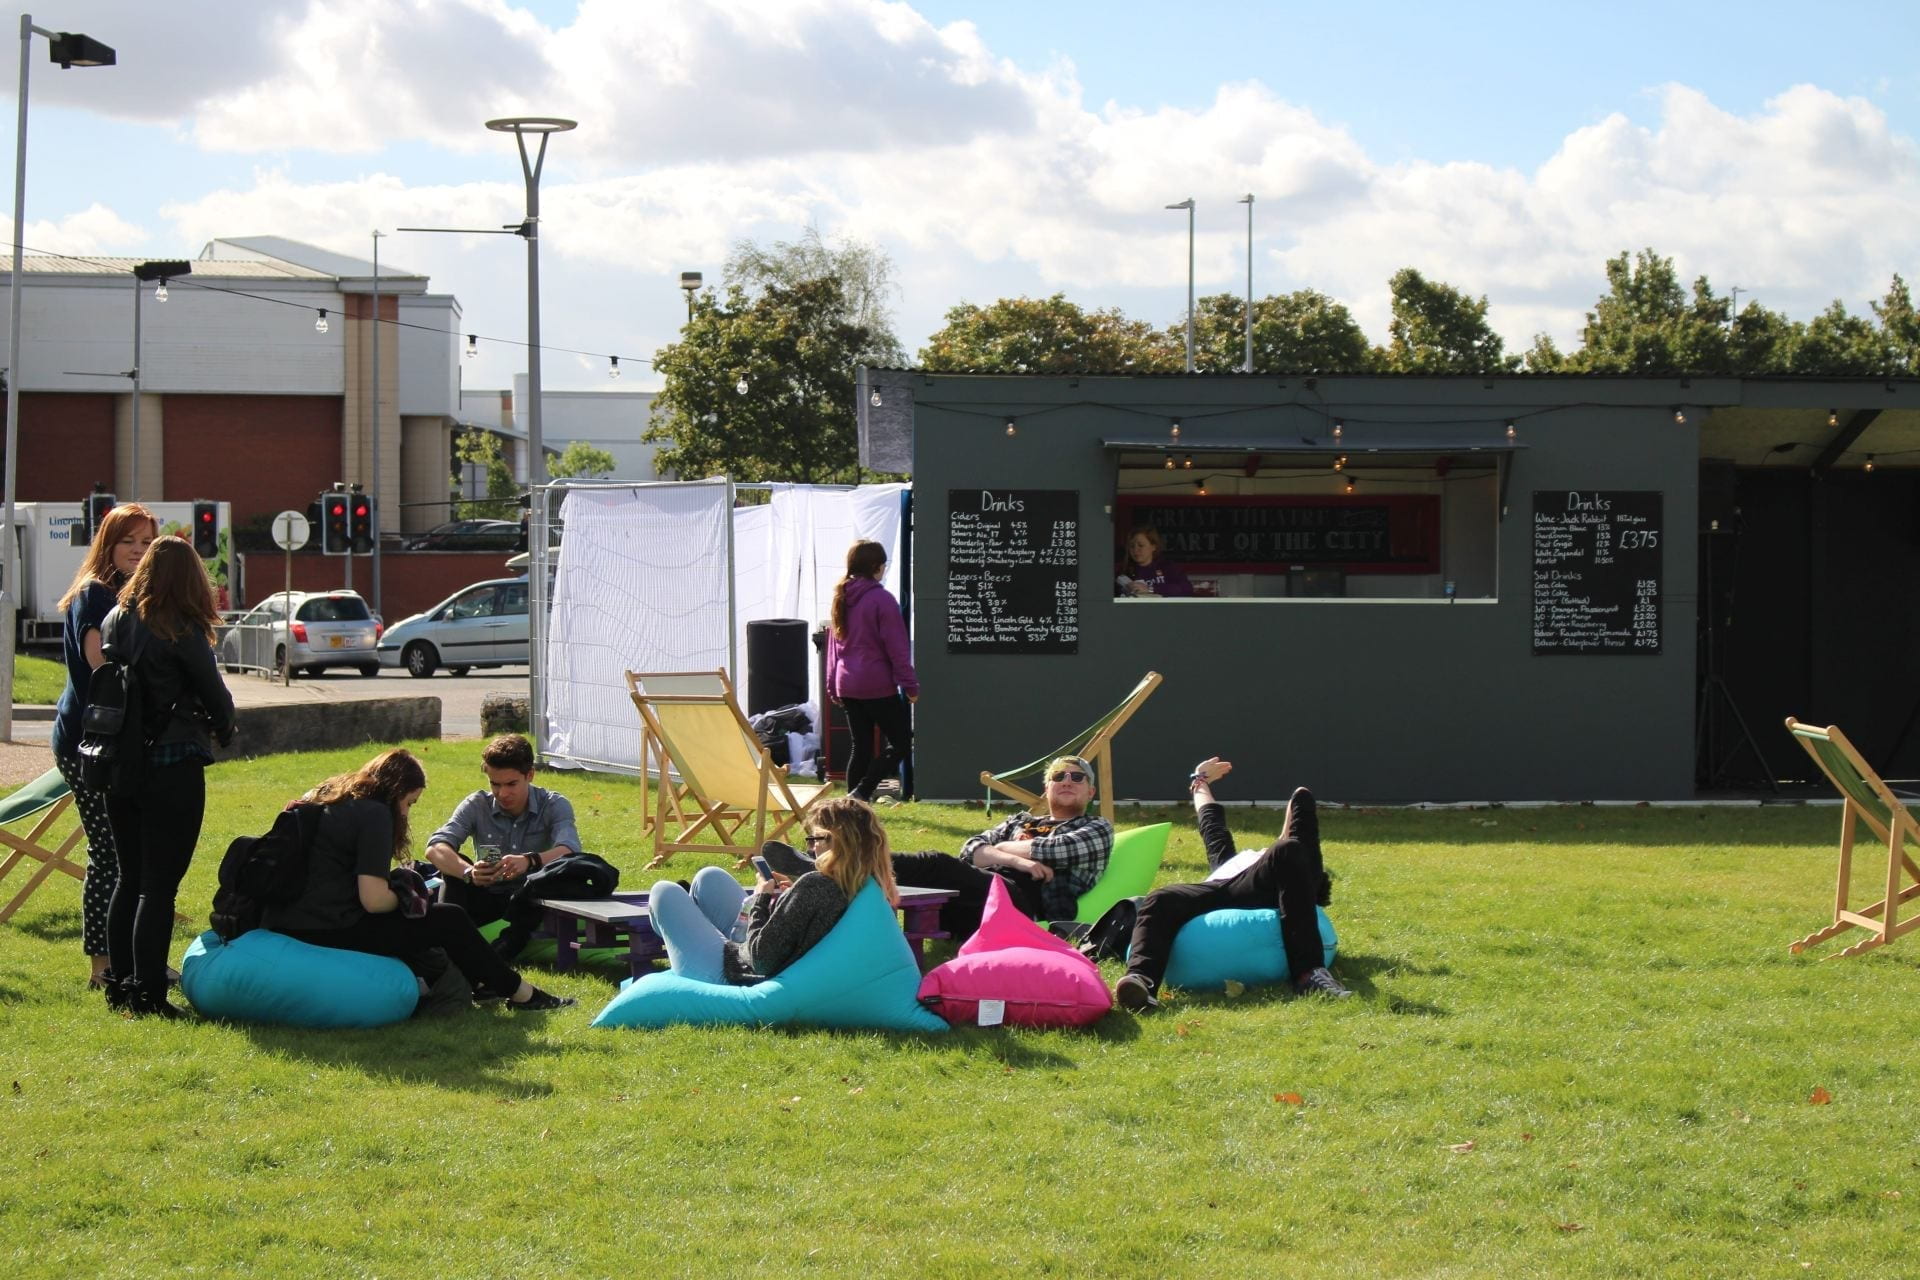 Students sitting on multi-coloured bean-bags outside temporary bar